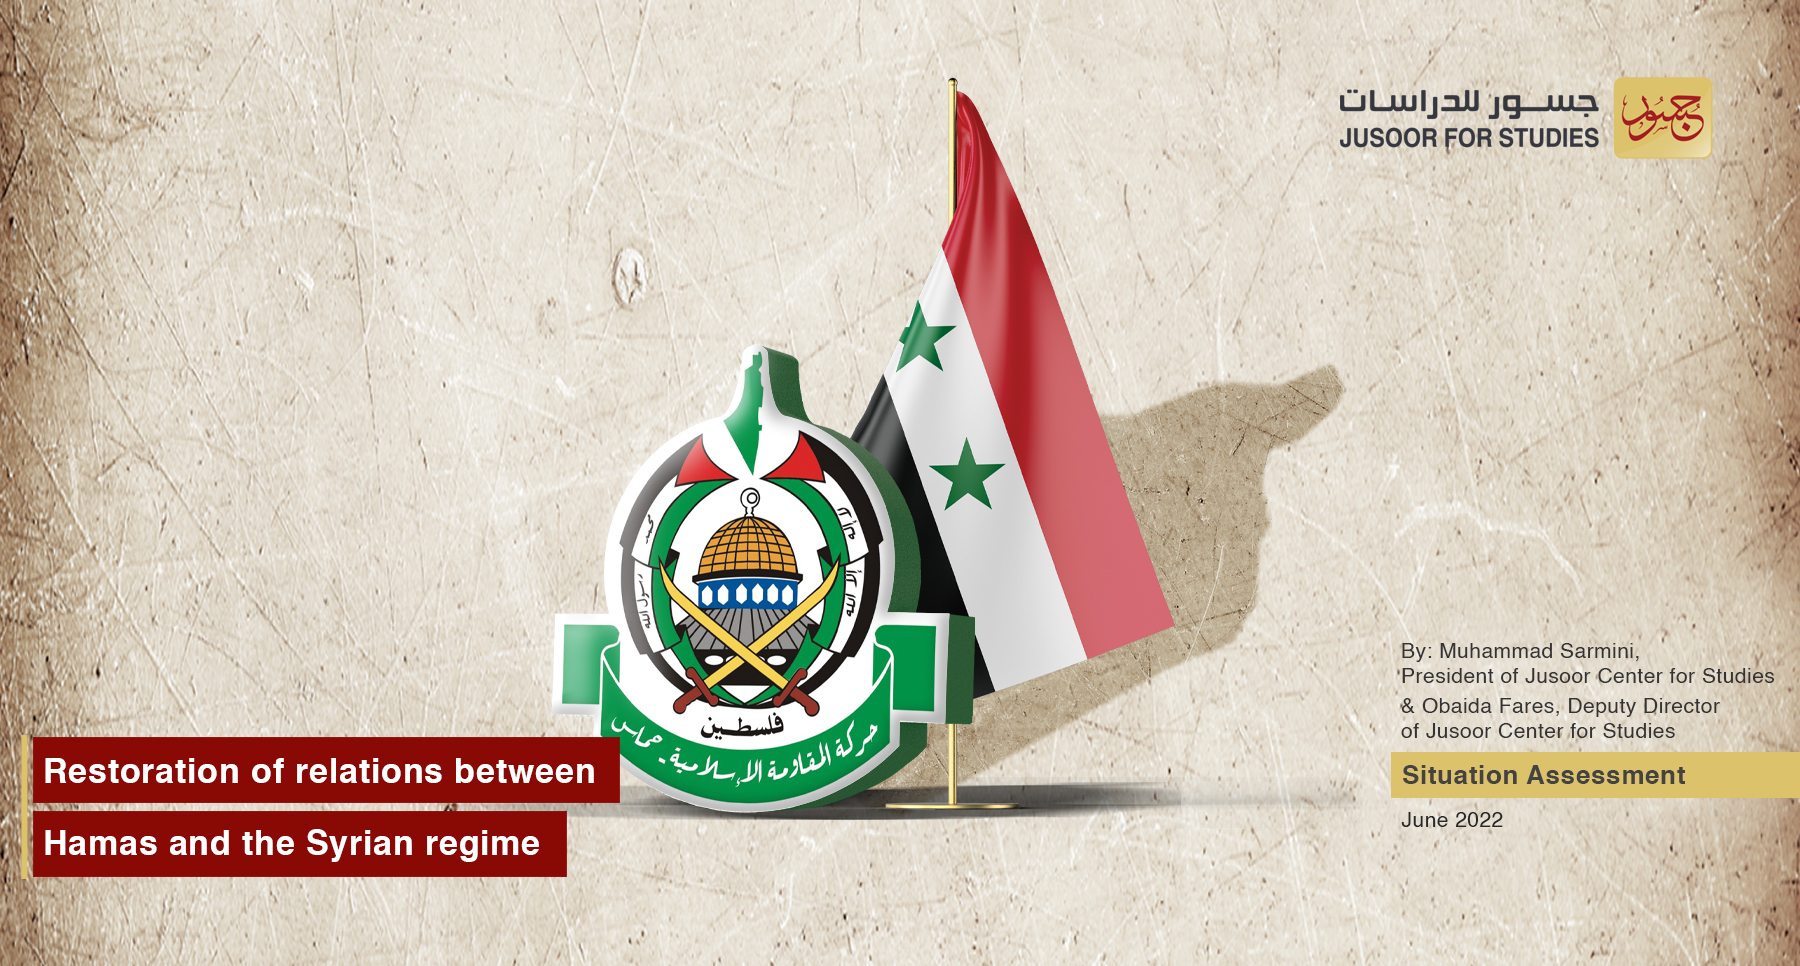 Situation Assessment Restoration of relations between Hamas and the Syrian regime